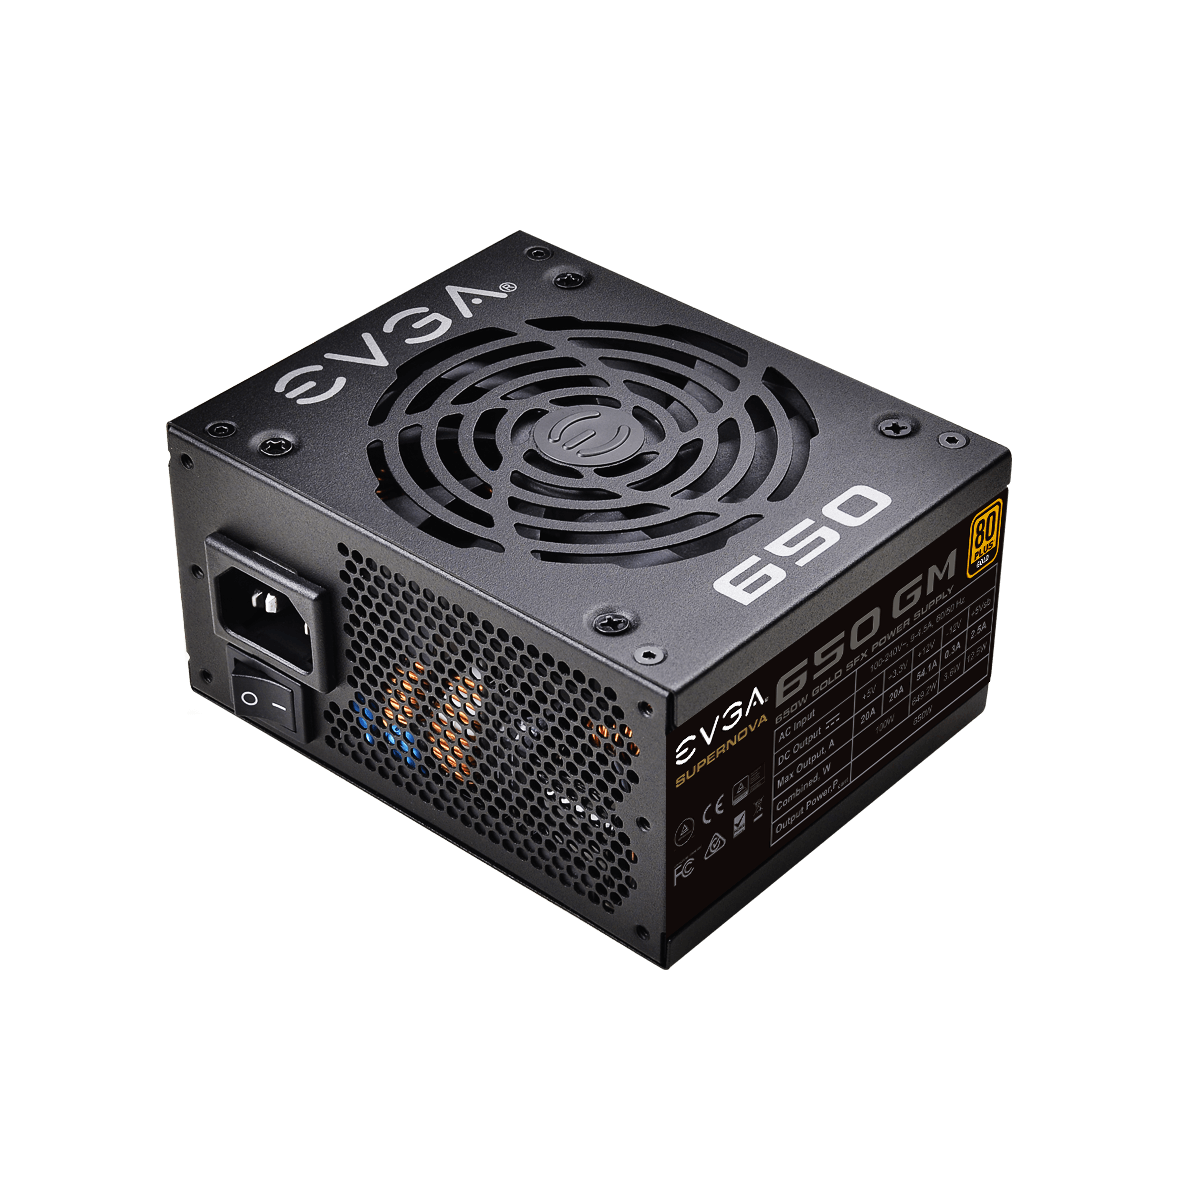 EVGA - Products - EVGA SuperNOVA 650 G6, 80 Plus Gold 650W, Fully Modular,  Eco Mode with FDB Fan, 10 Year Warranty, Includes Power ON Self Tester,  Compact 140mm Size, Power Supply 220-G6-0650-X1 - 220-G6-0650-X1